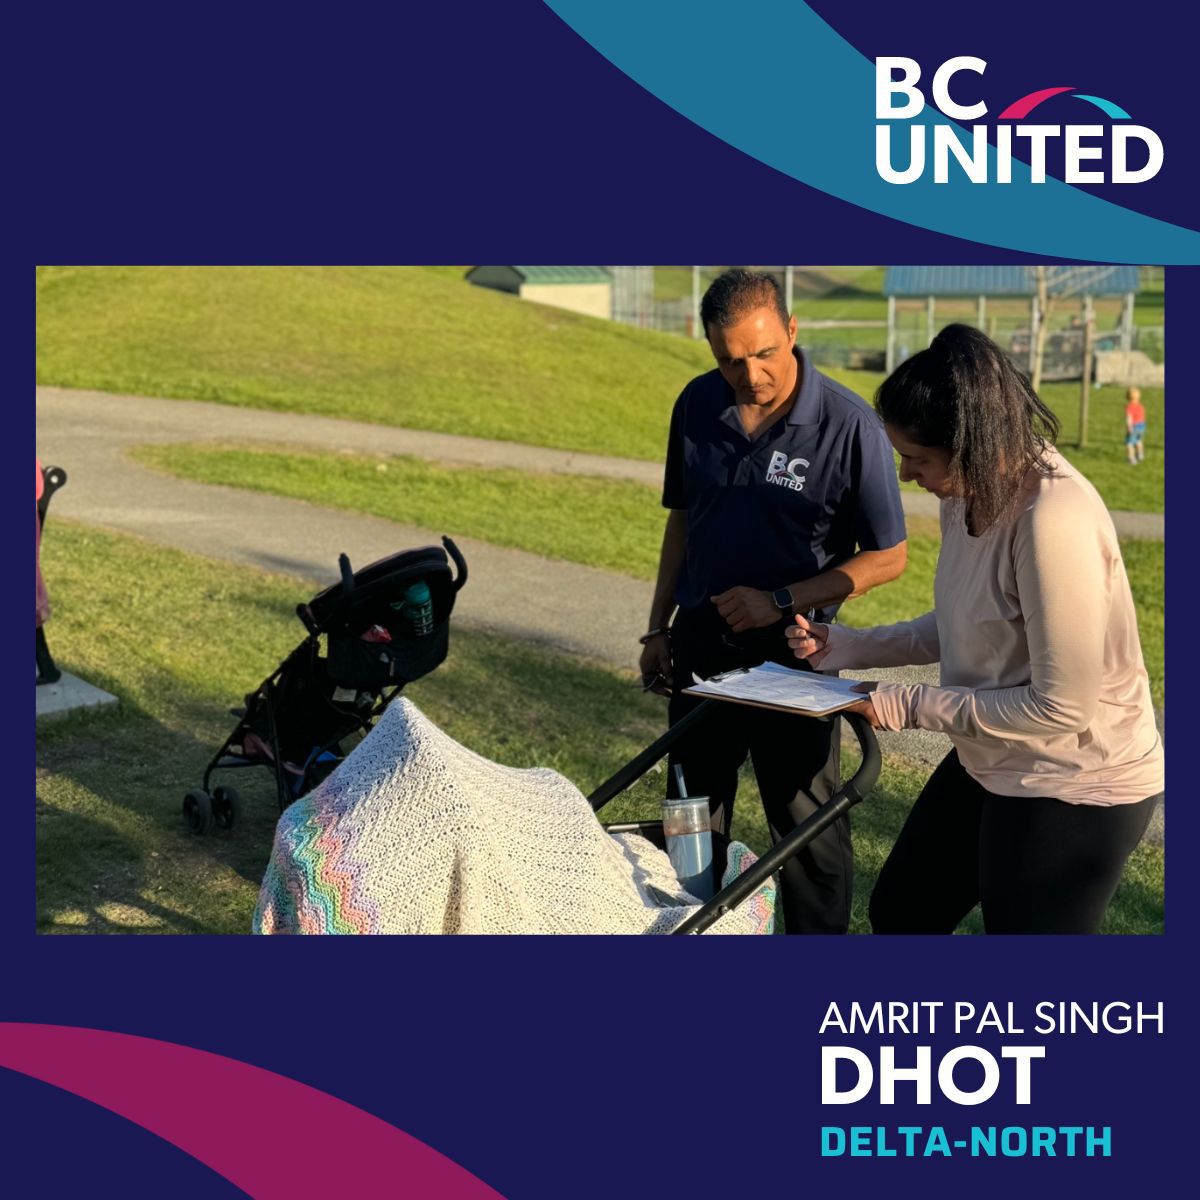 What an amazing #SuperSaturday — our first day on the doors and an overwhelming amount of support and confidence in our campaign. 

#bcpoli #BCUnited #teamdhot #Delta #DeltaNorth #spotdhot #dhotonyourdoorstep #pakorasinthepark #doorknock #BCUnitedTogether #BelieveinBC #deltabc